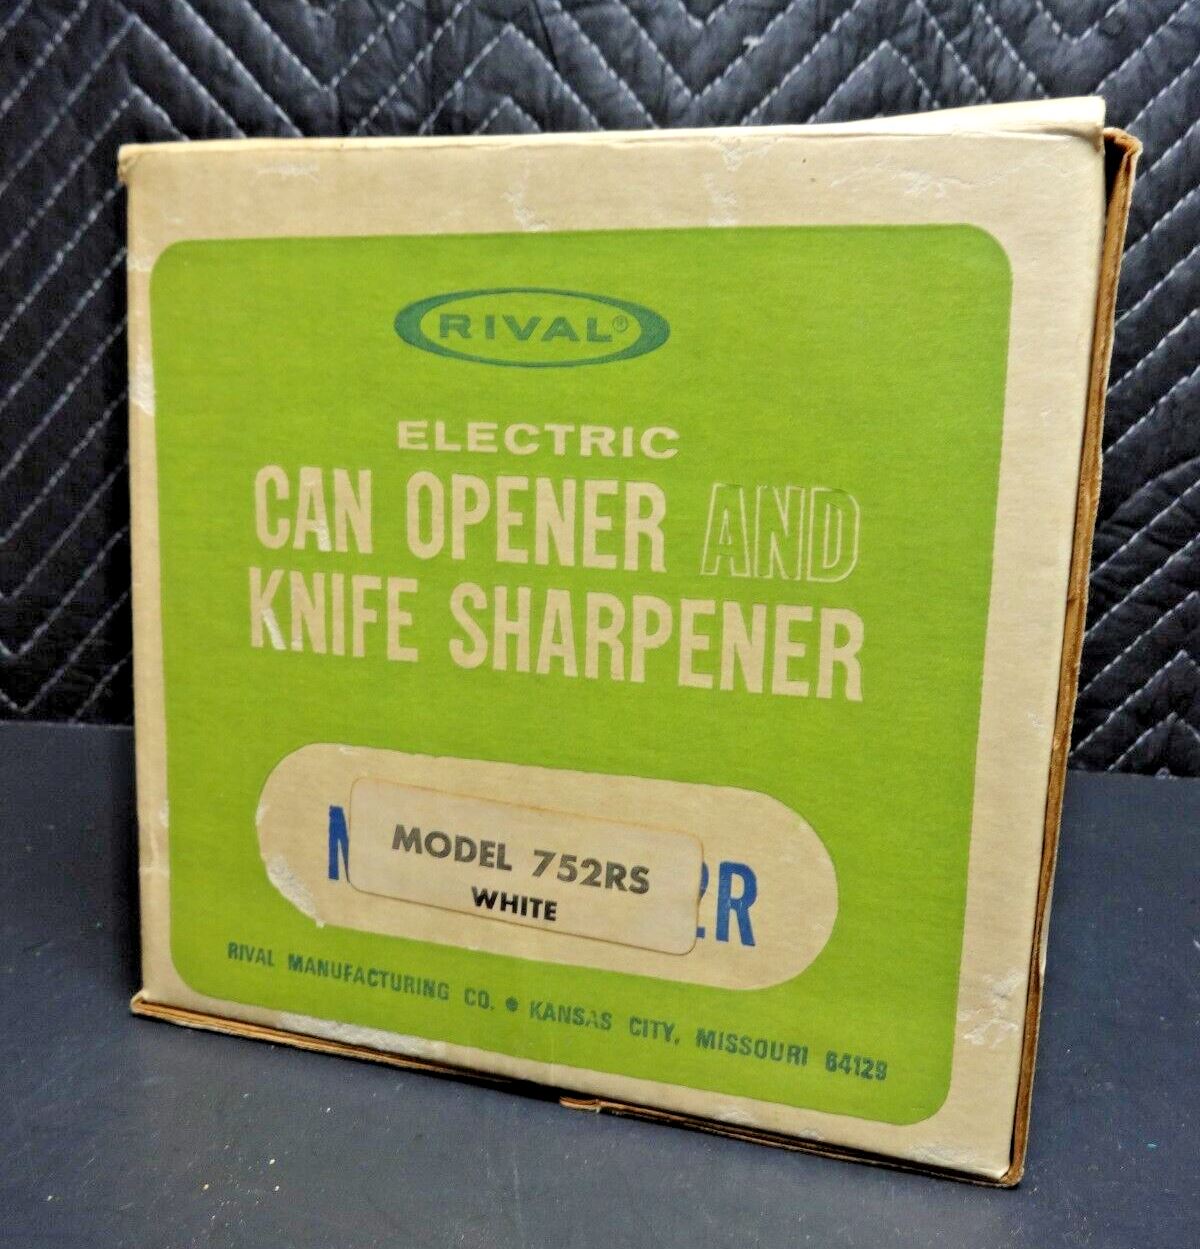 Very Clean Rival Electric Can Opener with Knife Sharpener Model 782 #Rival